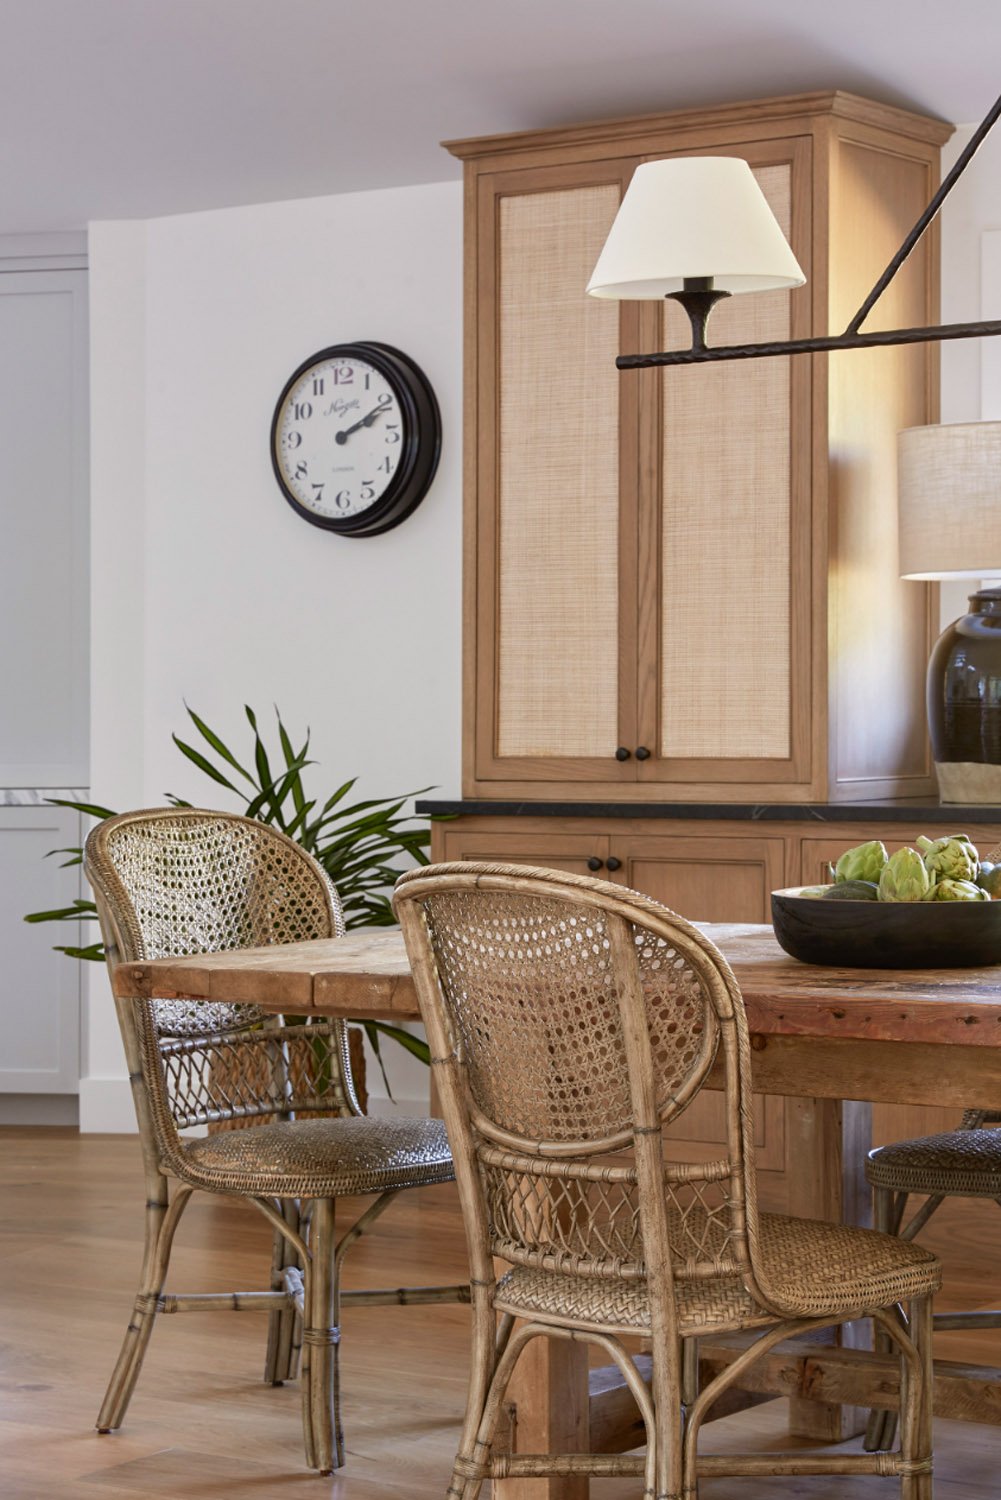 Rattan dining room chairs and cupboard.jpg